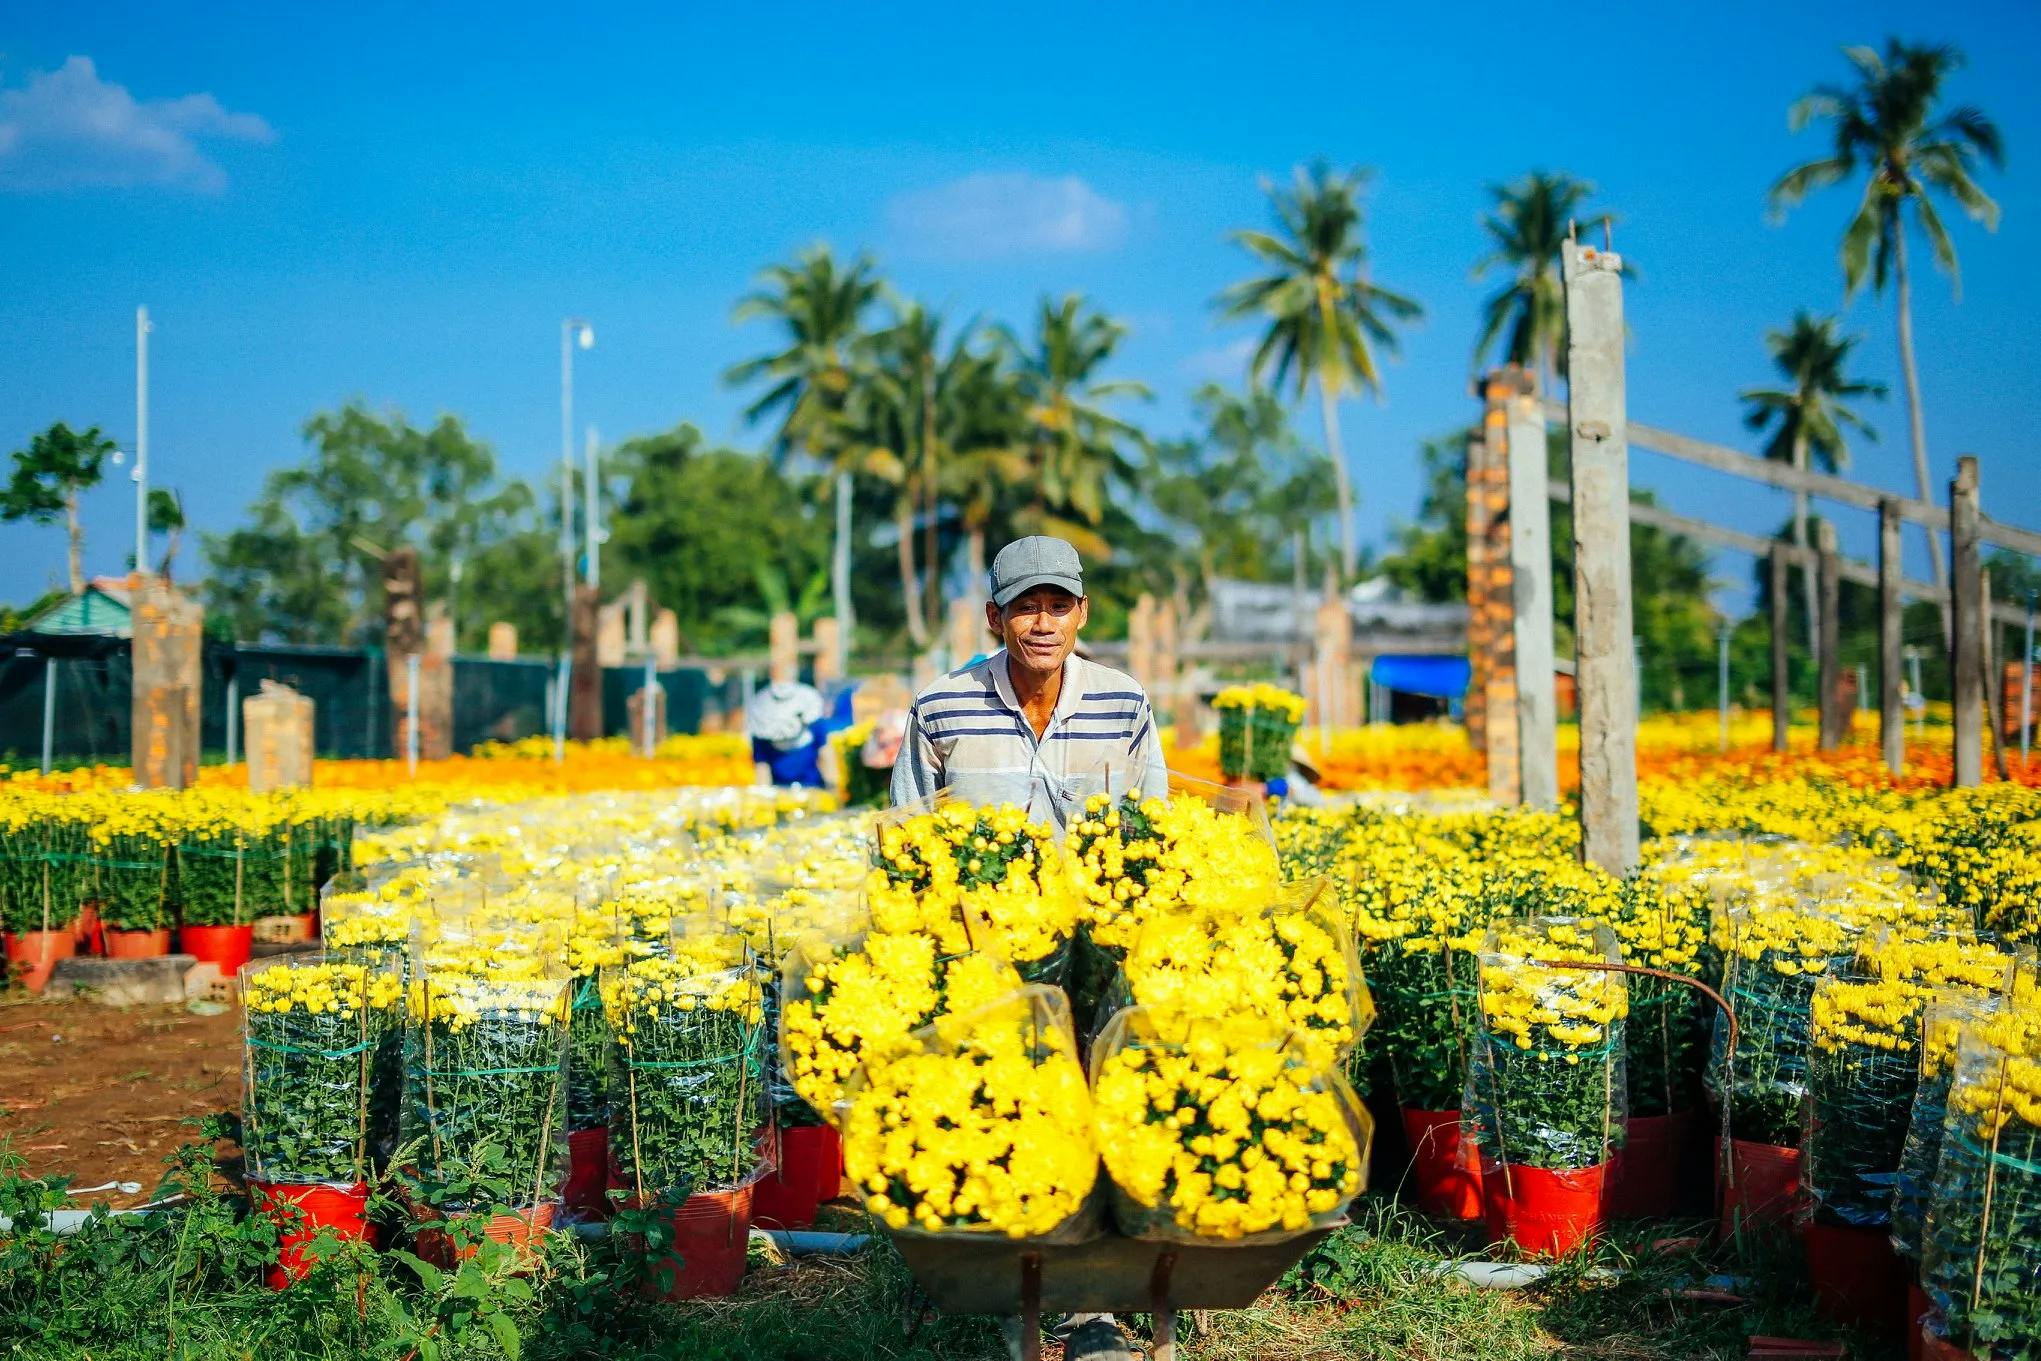 The man is pushing a cart carrying chrysanthemums